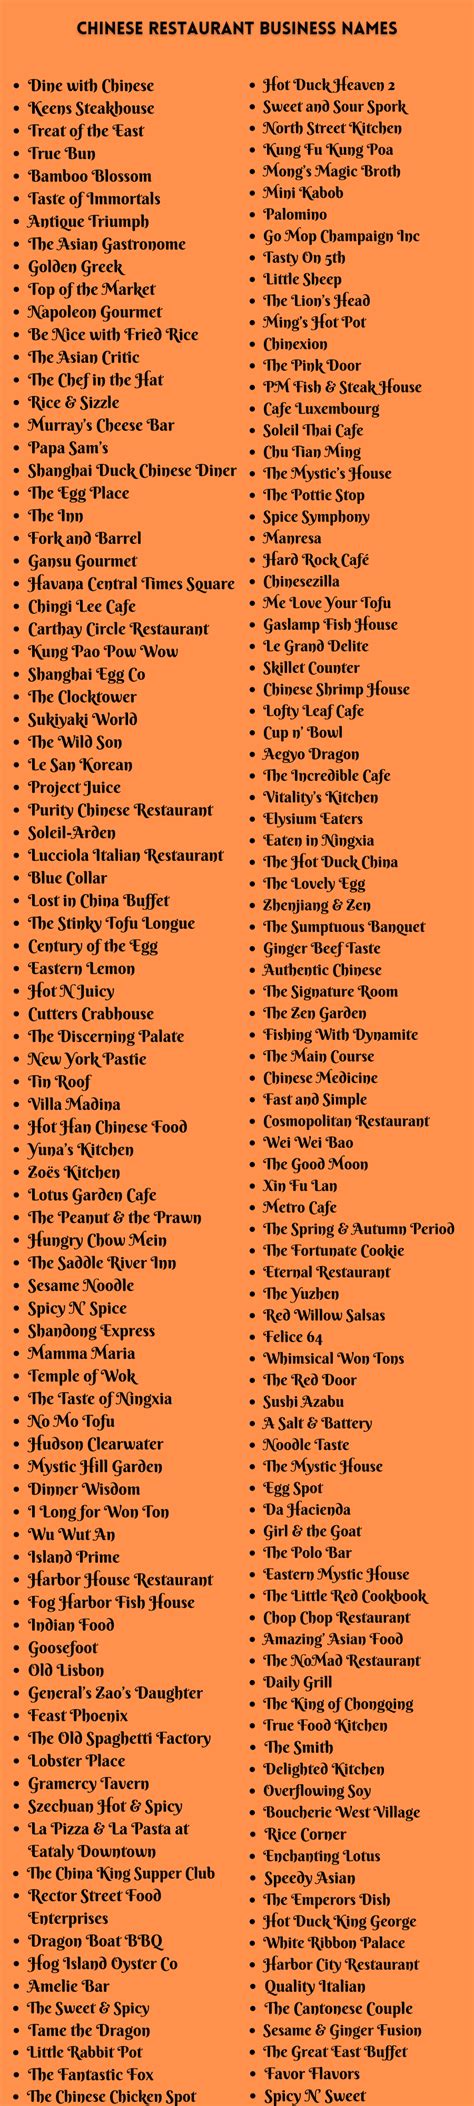 Top What Is The Most Popular Chinese Restaurant Name